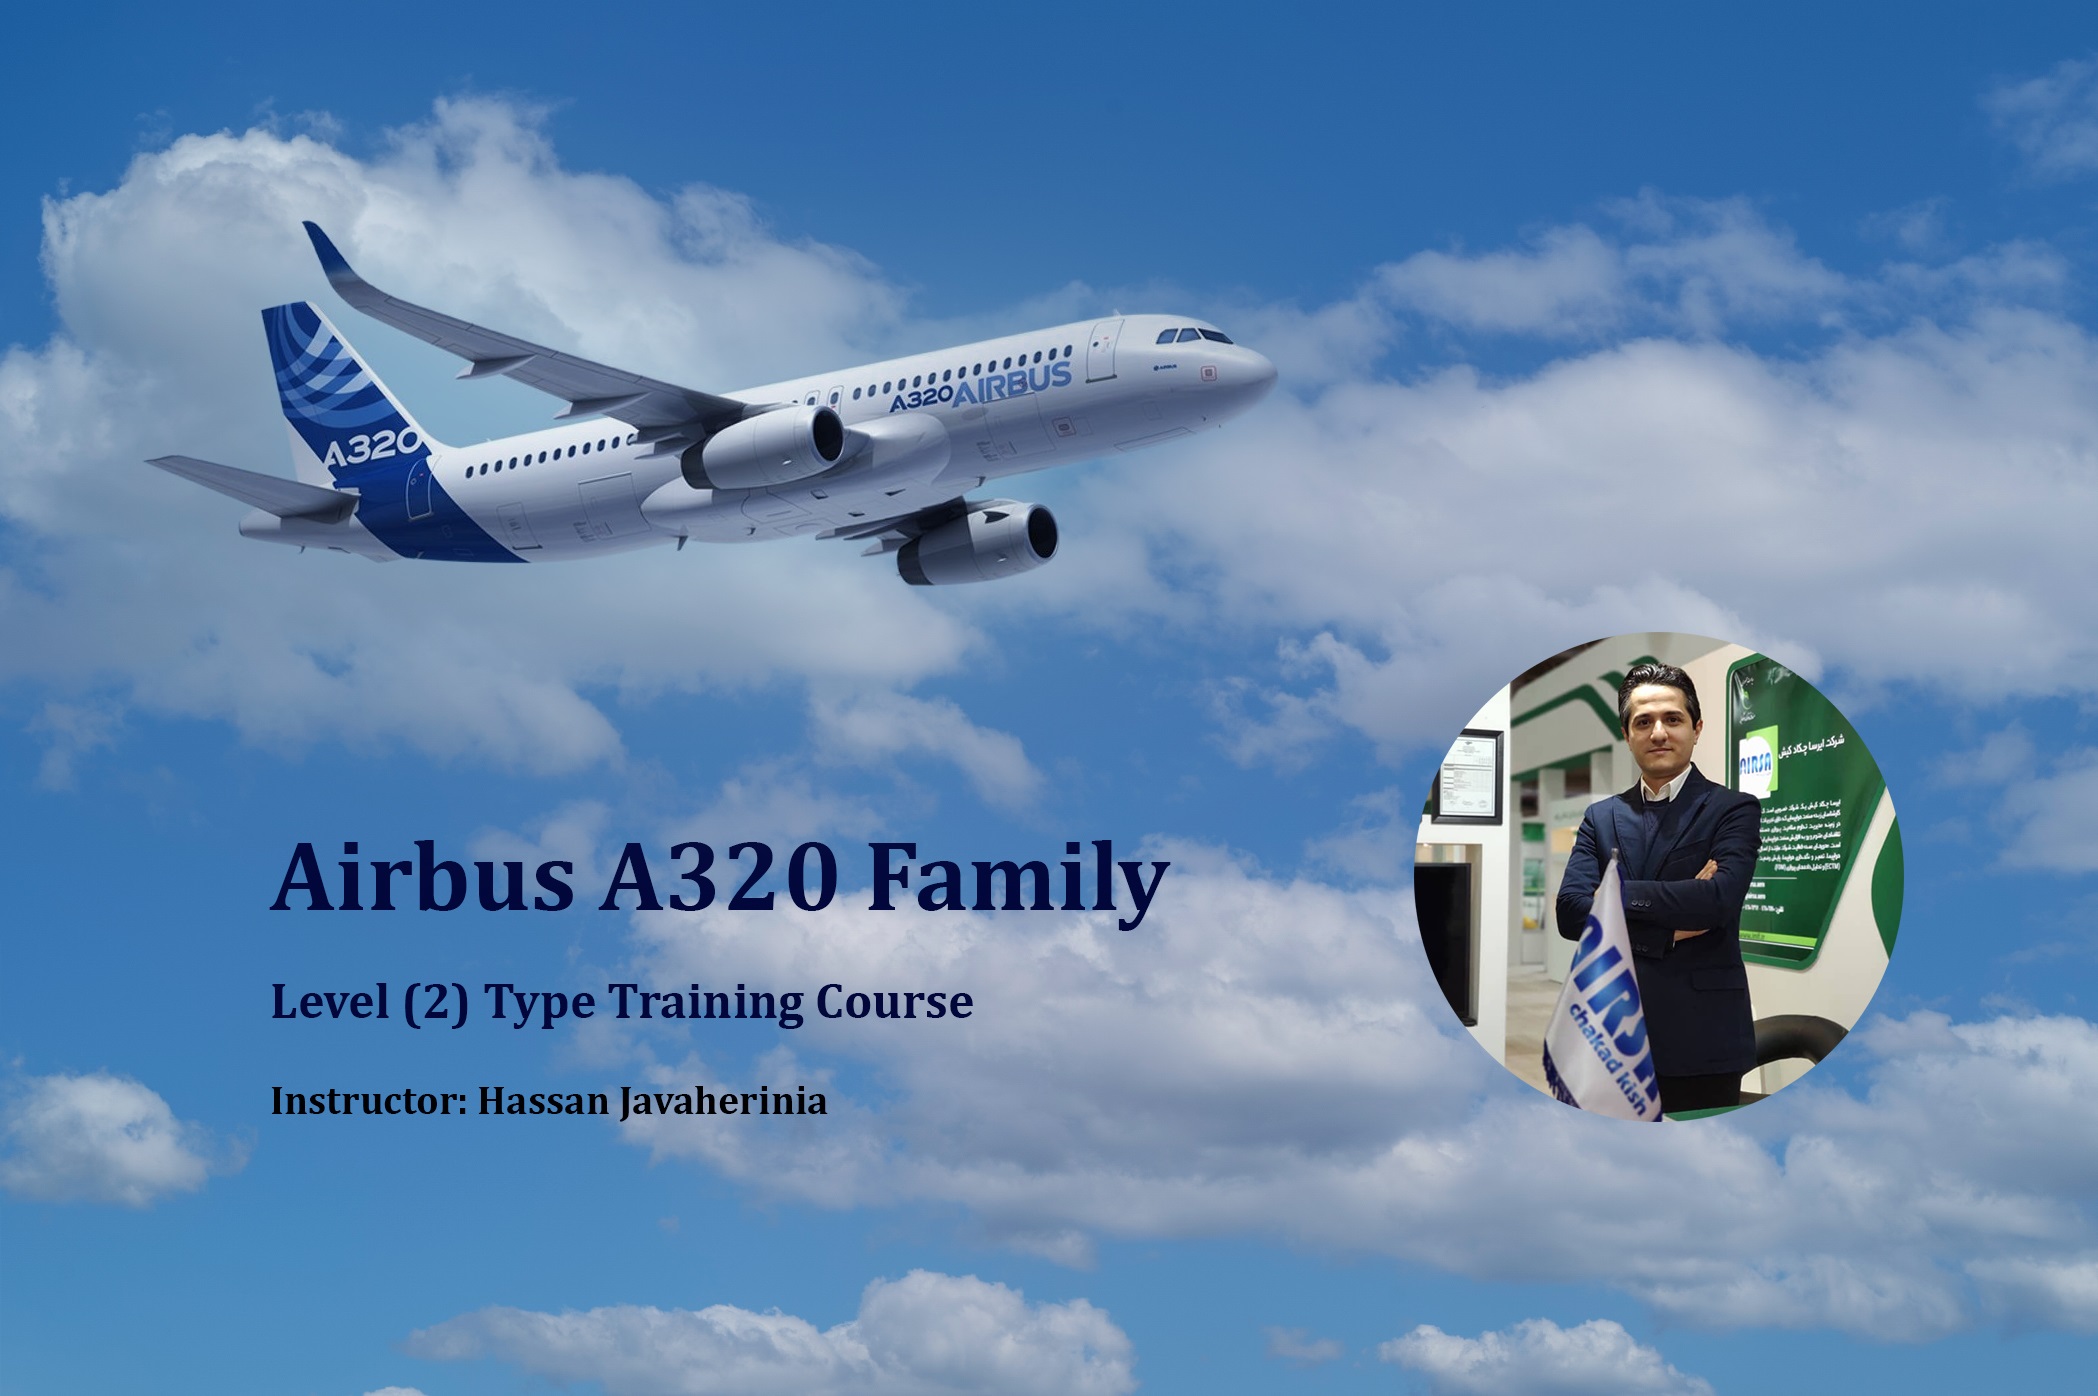 Airbus A320 Family Training Course